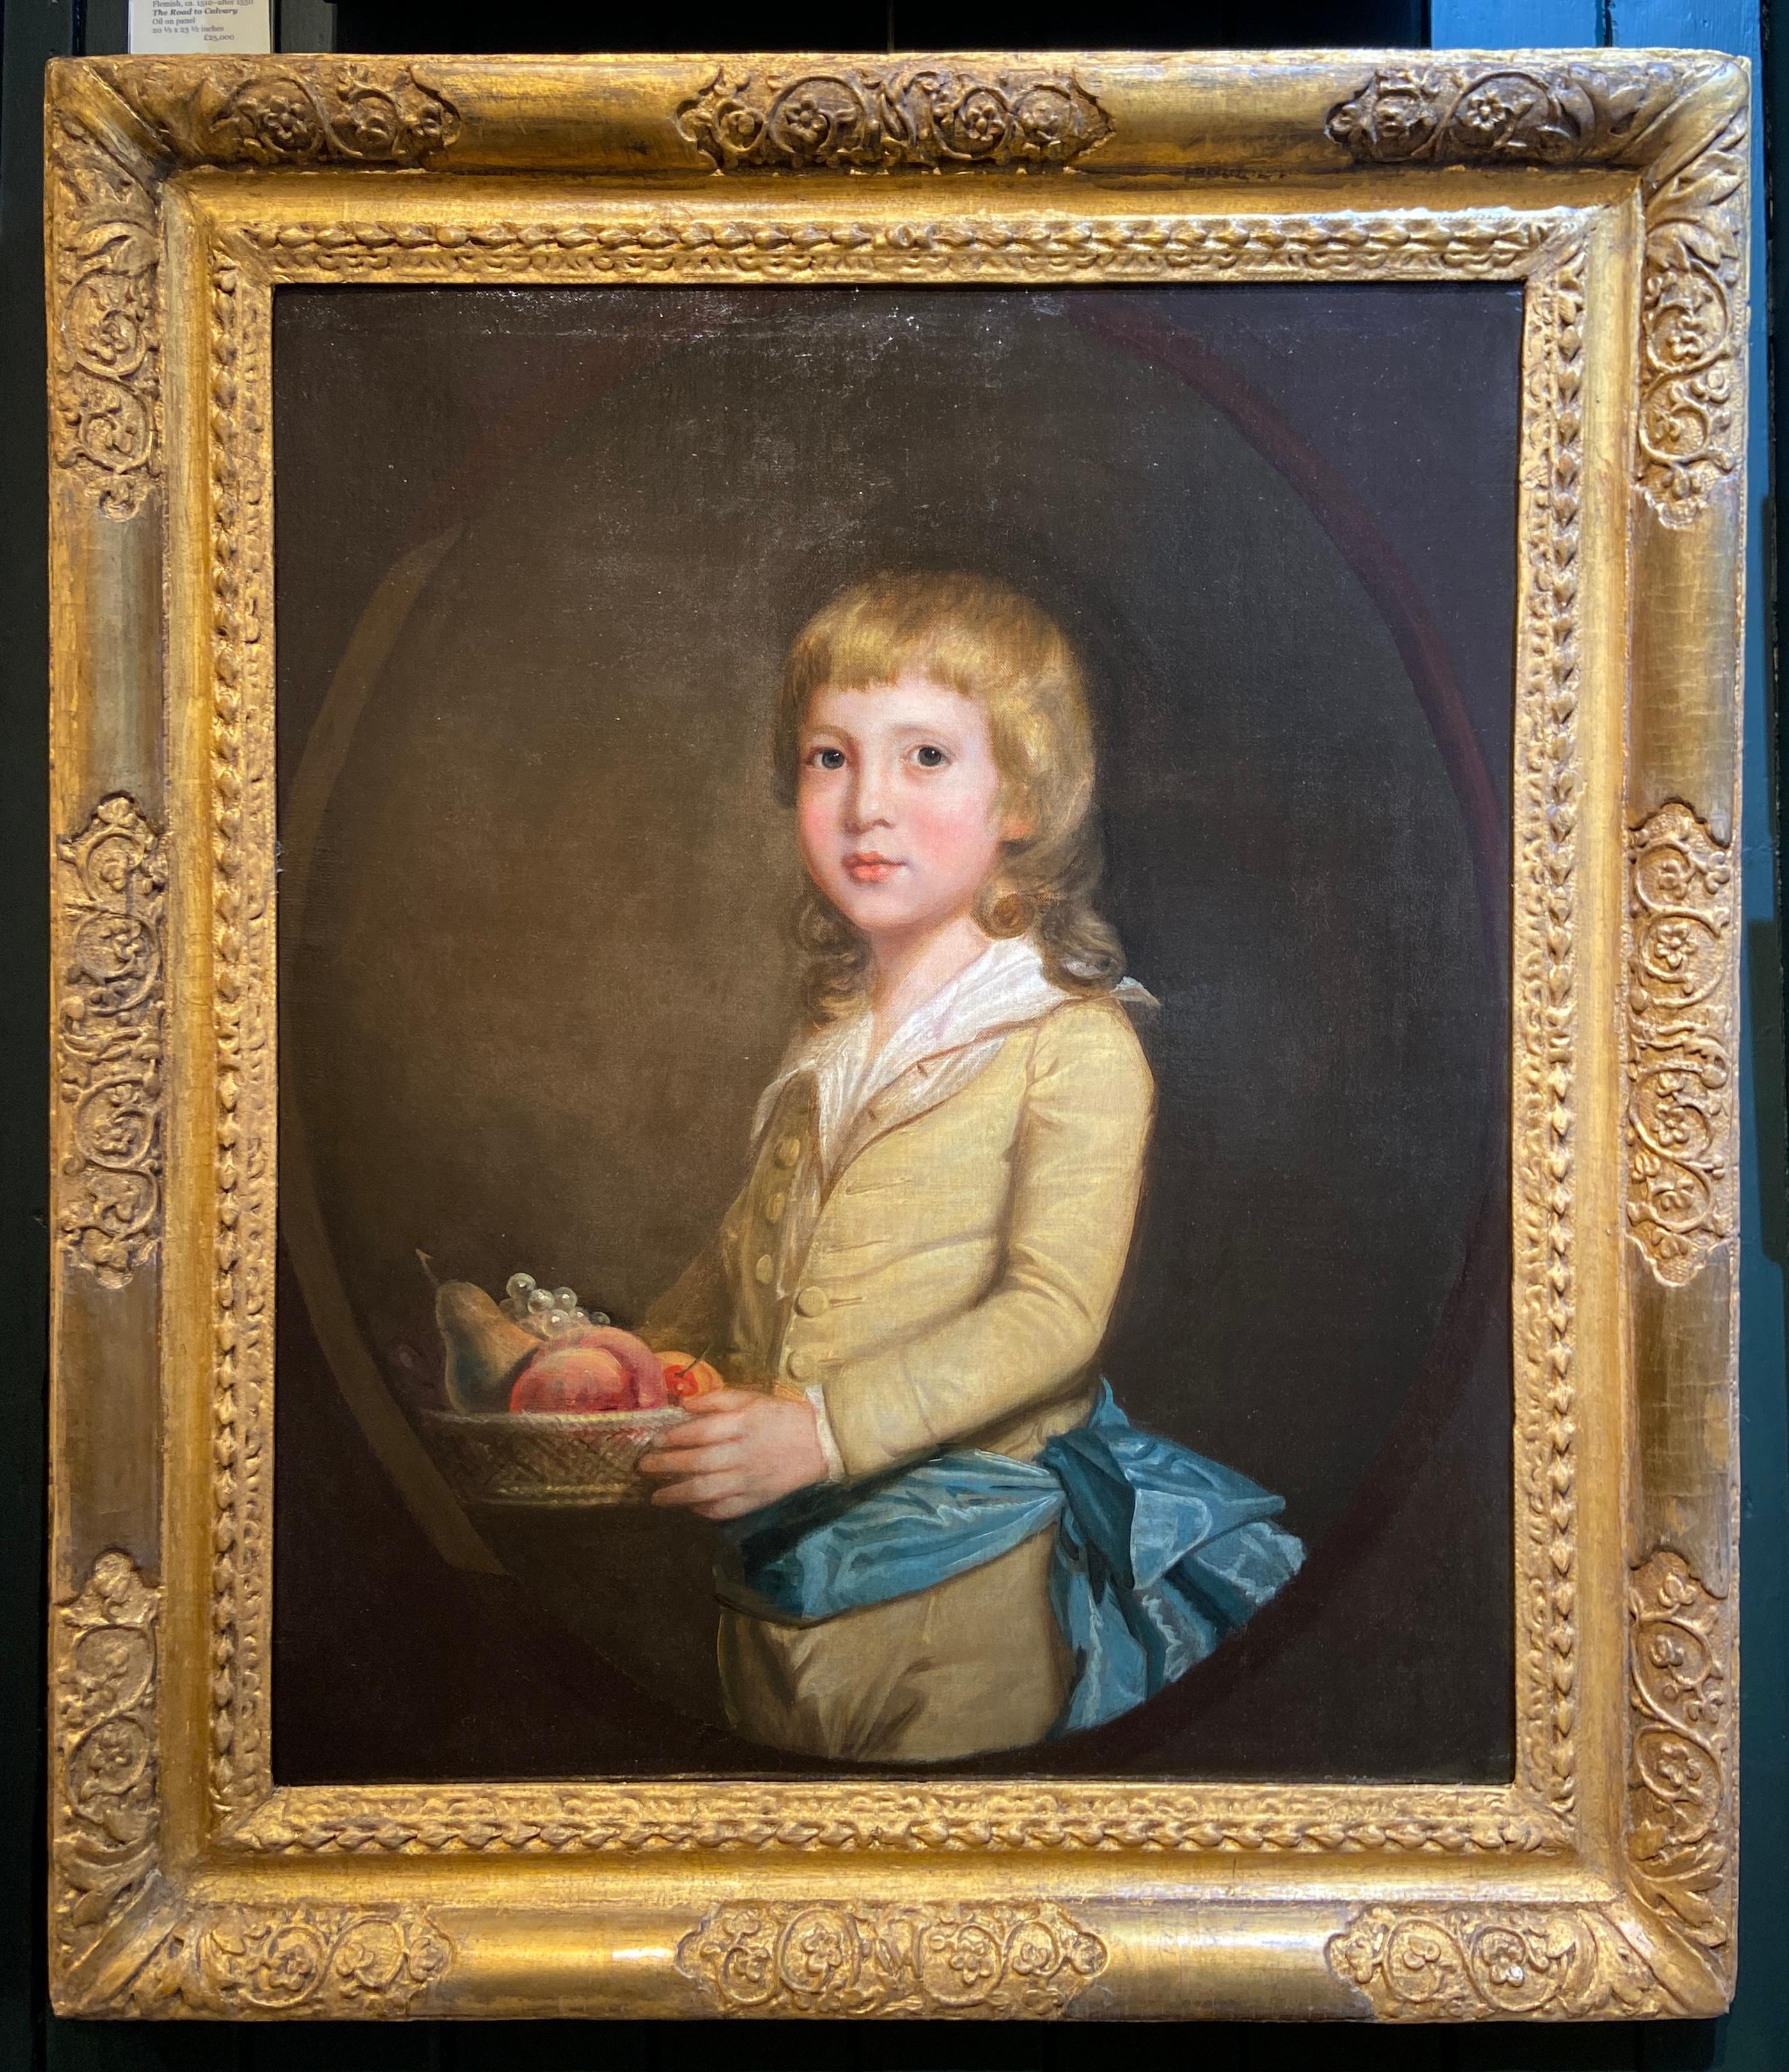 Portrait of a Young Boy Carrying a Fruit Basket, 18th Century Oil on Canvas - Painting by Sir William Beechey